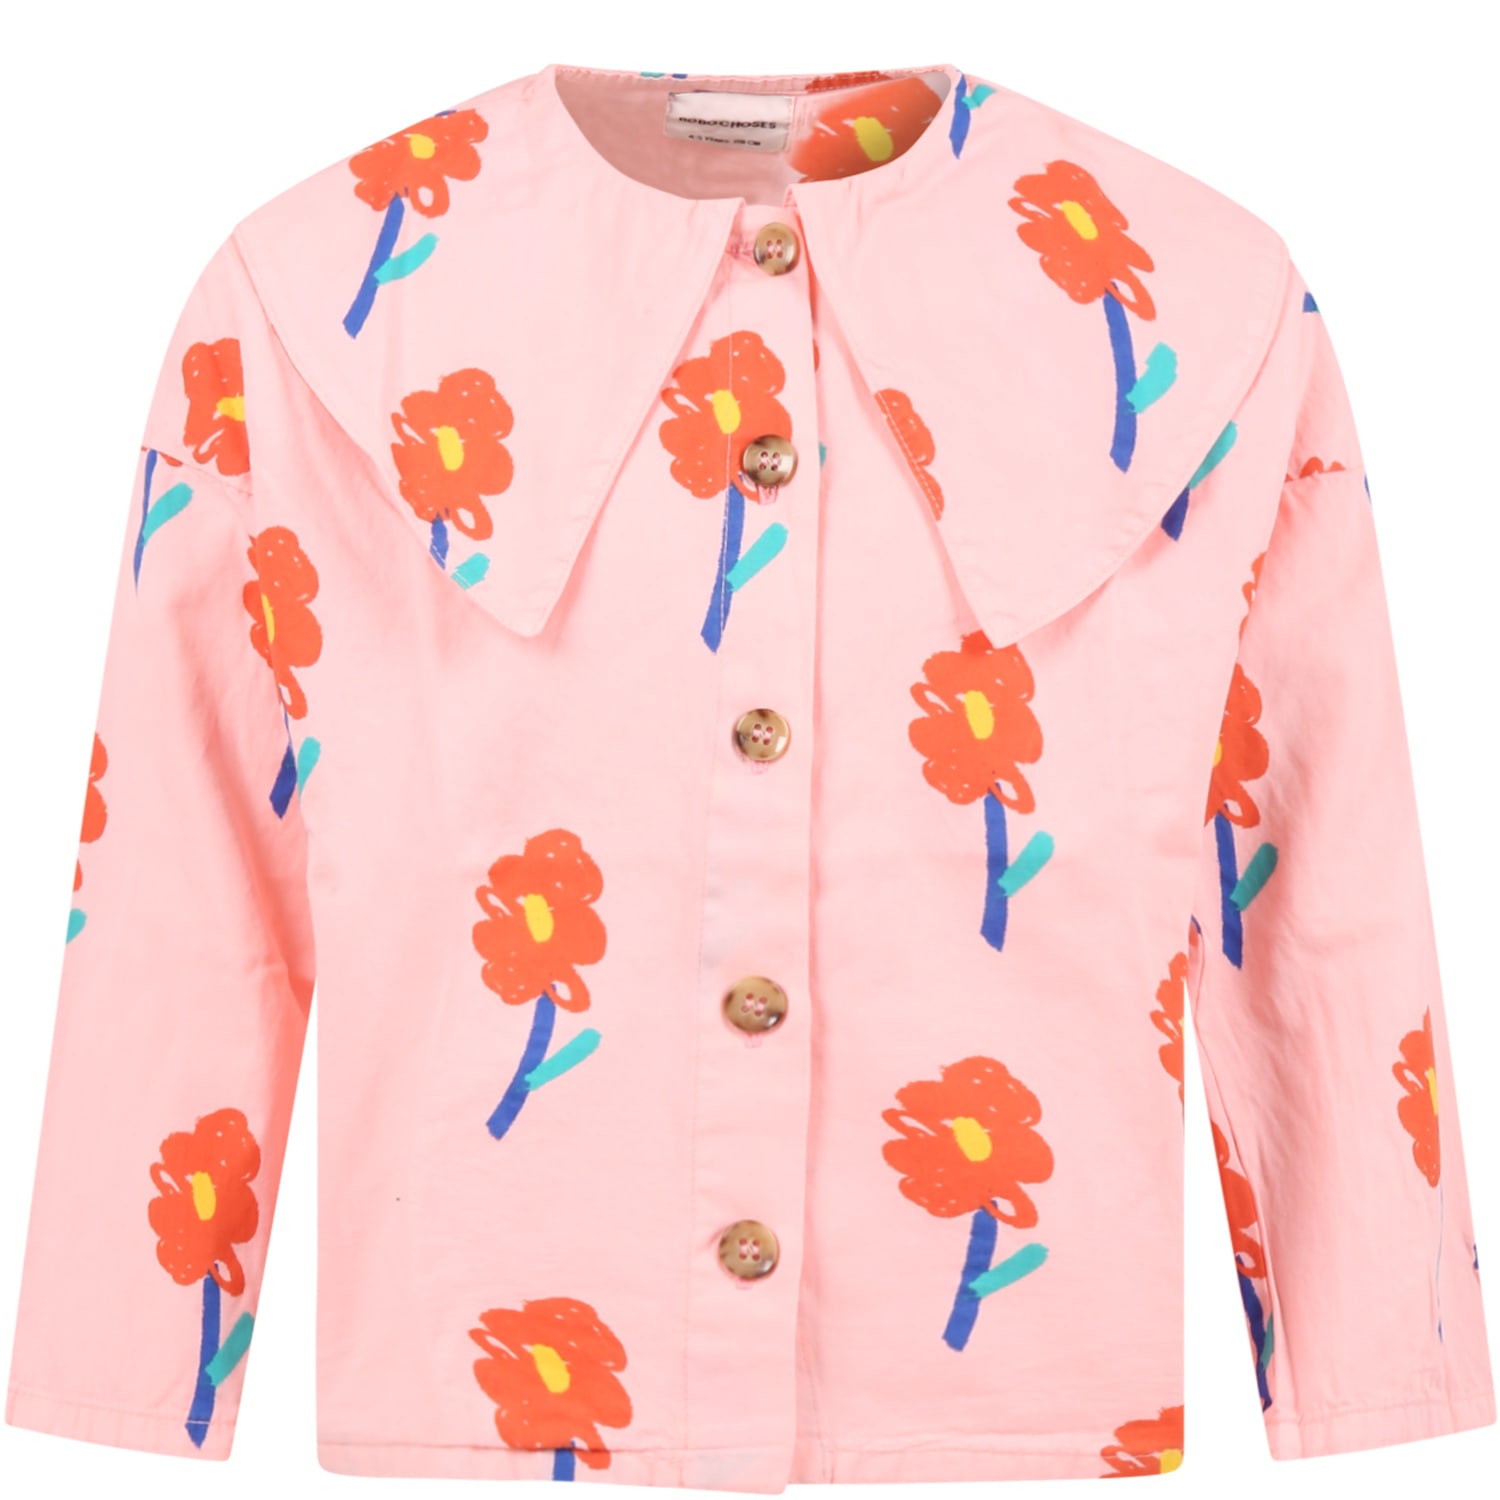 Bobo Choses Pink Shirt For Girl With Colorful Flowers